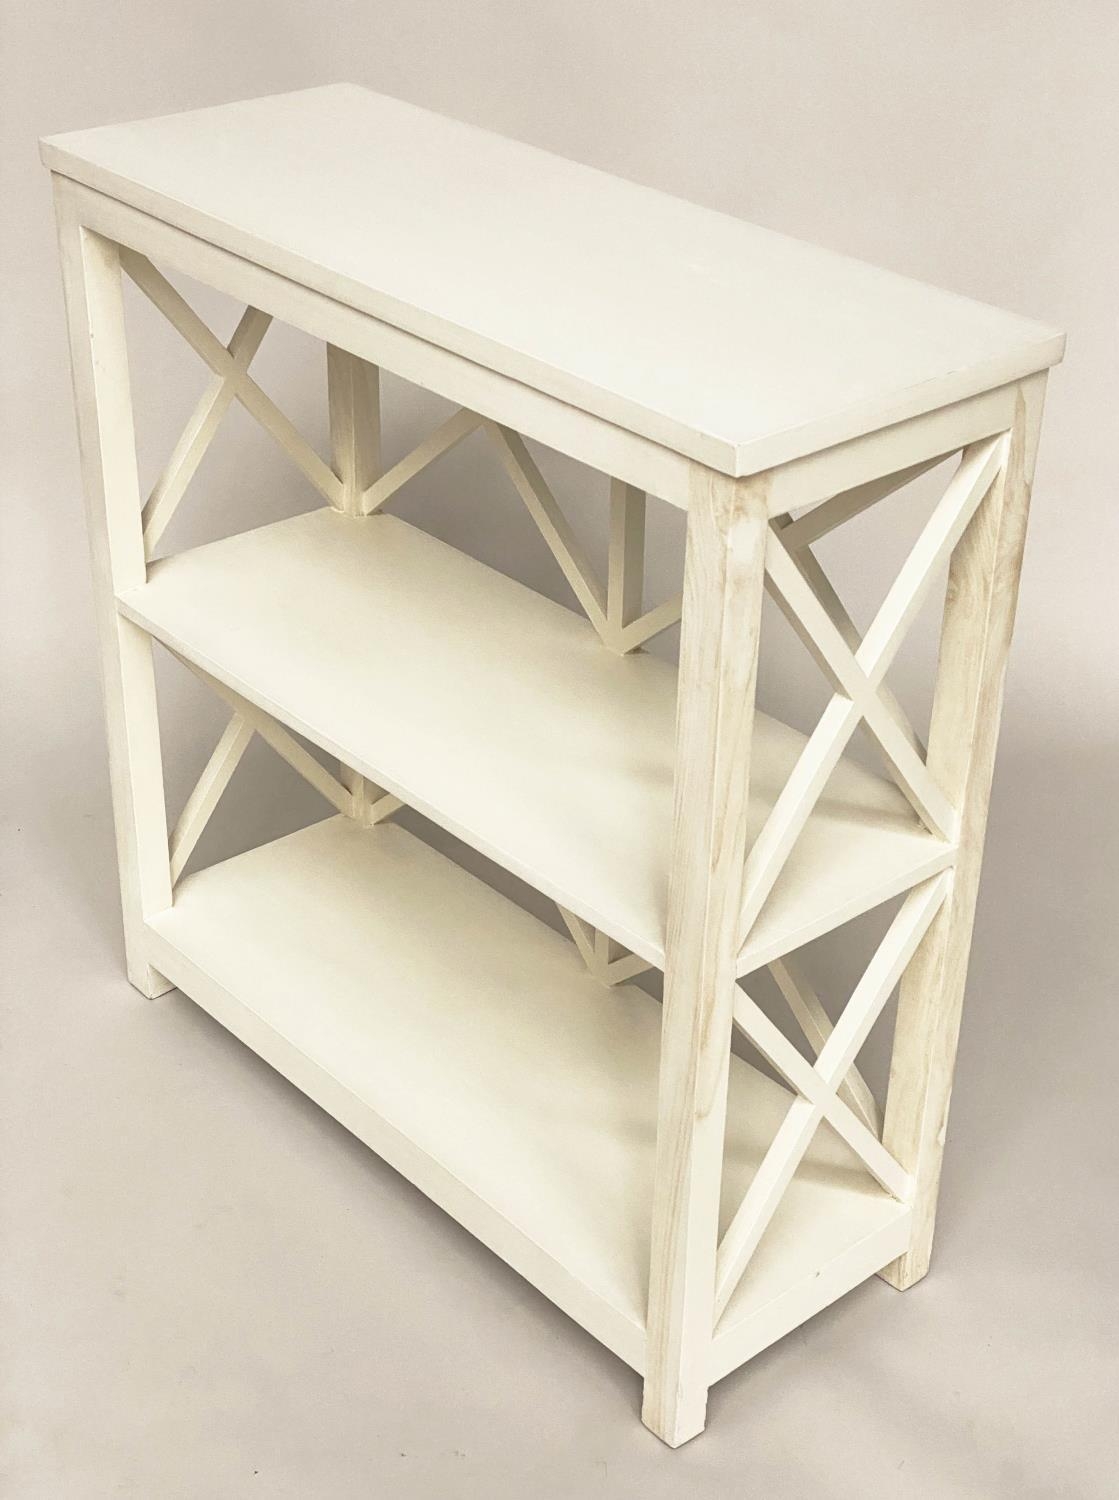 OPEN BOOKCASE, Oka style white painted with two shelves and lattice framework, 85cm W x 33cm D x - Image 5 of 5